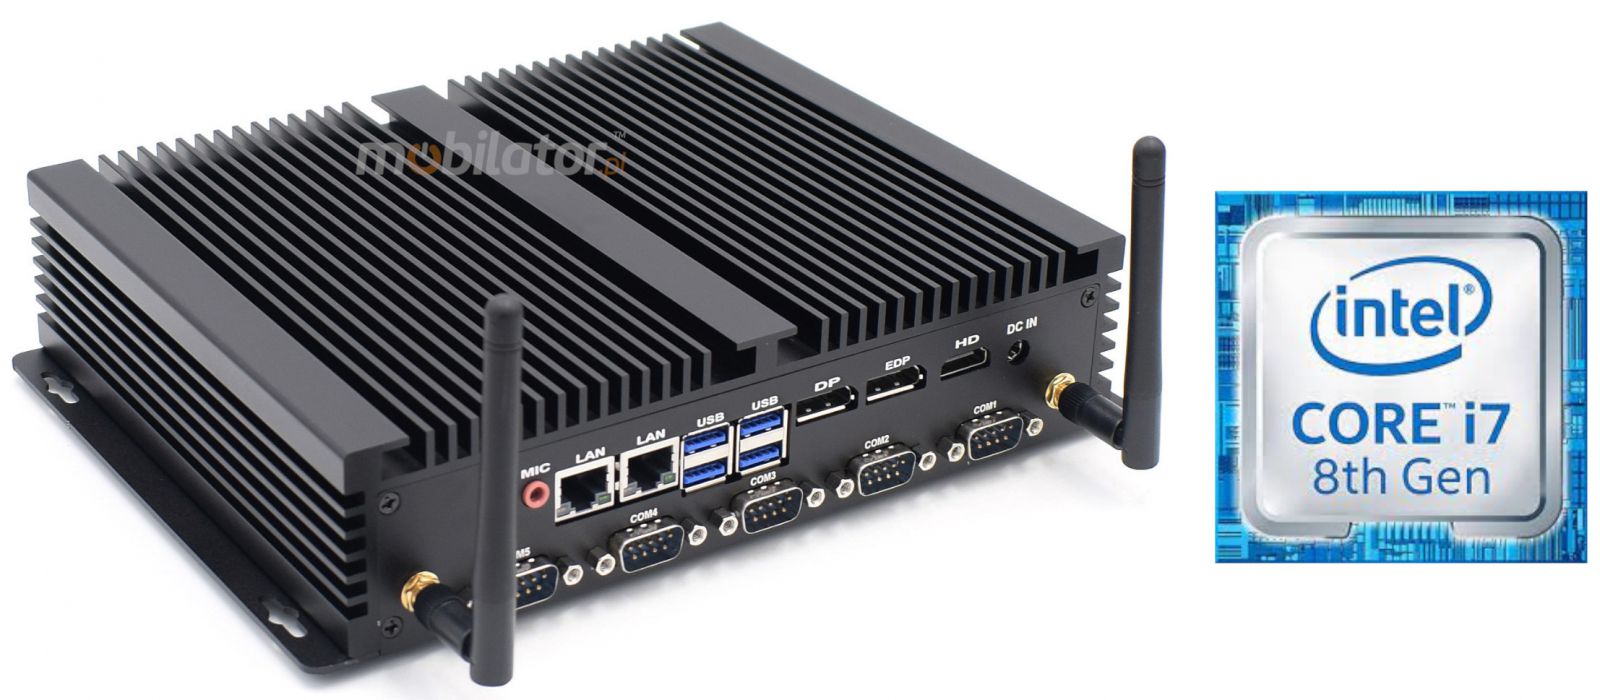 HyBOX H4 Intel i7  a small reliable and fast mini pc with a powerful processor